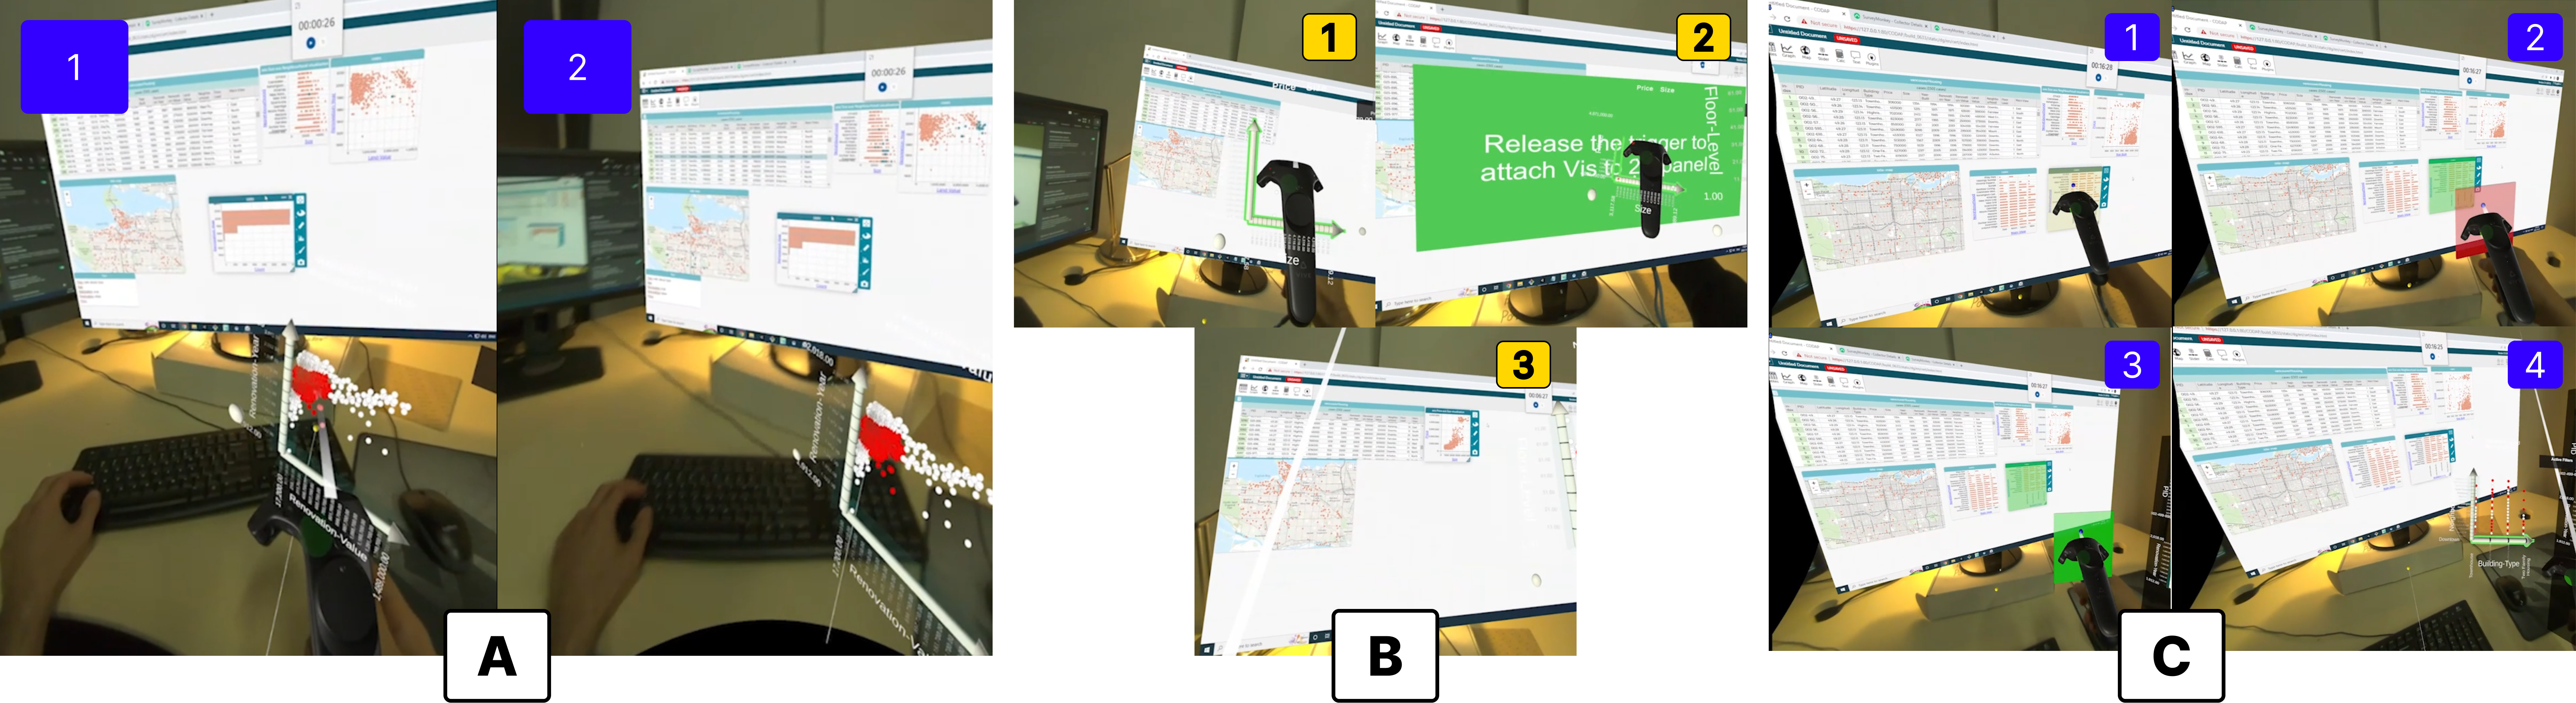 Analyzing User Behaviour Patterns in a Cross-virtuality Immersive Analytics System